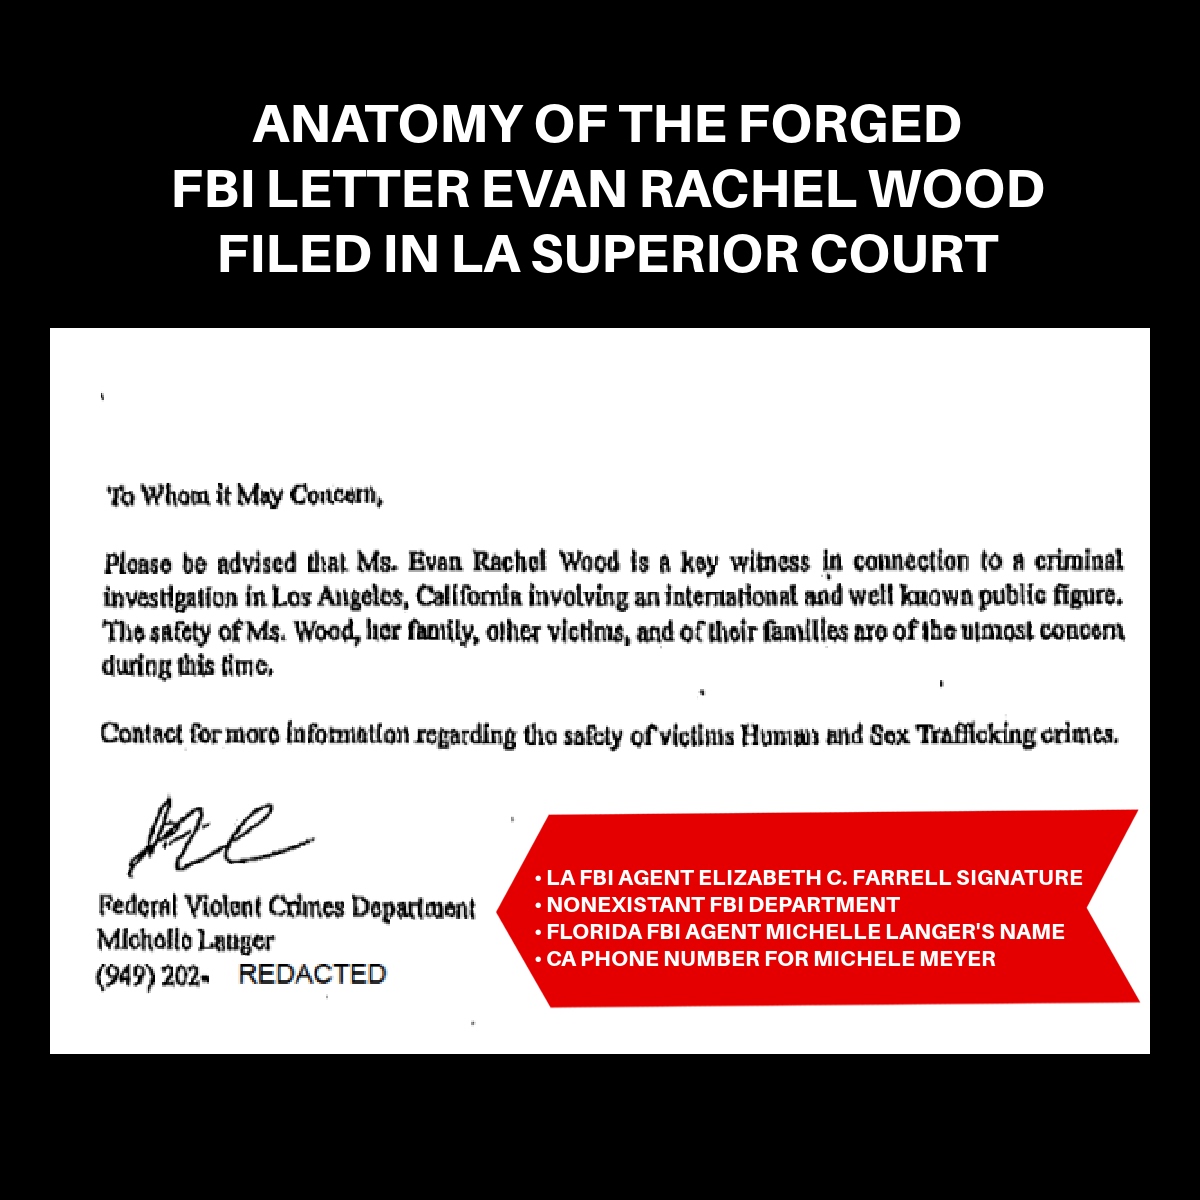 Justice for Marilyn Manson I Anatomy of the Forged FBI letter Evan Rachel Wood filed in court